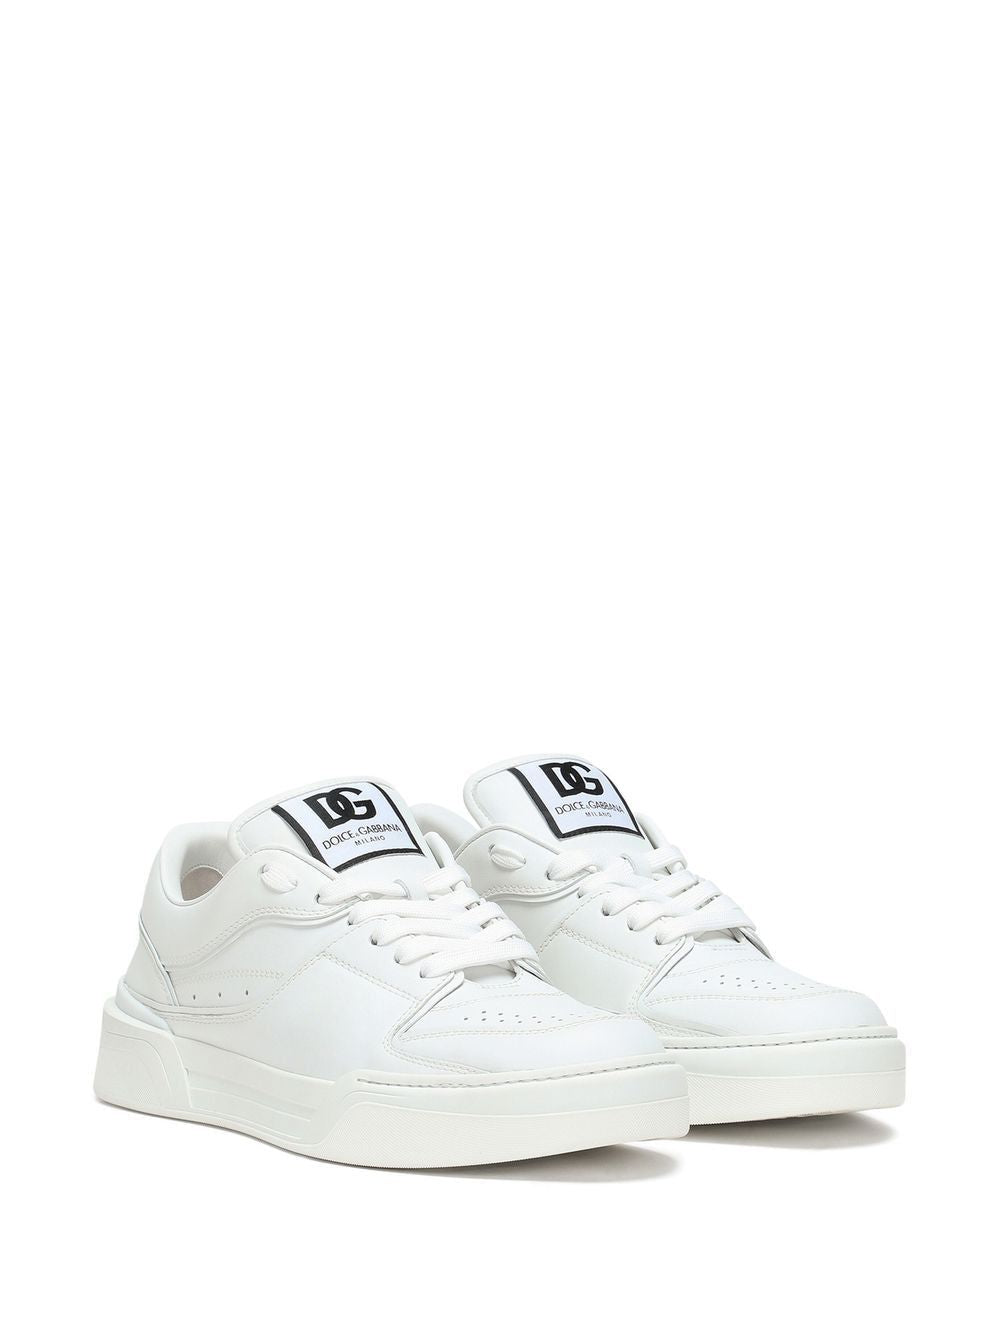 DOLCE & GABBANA NEW ROME Leather Sneakers for Men in White - SS23 Collection